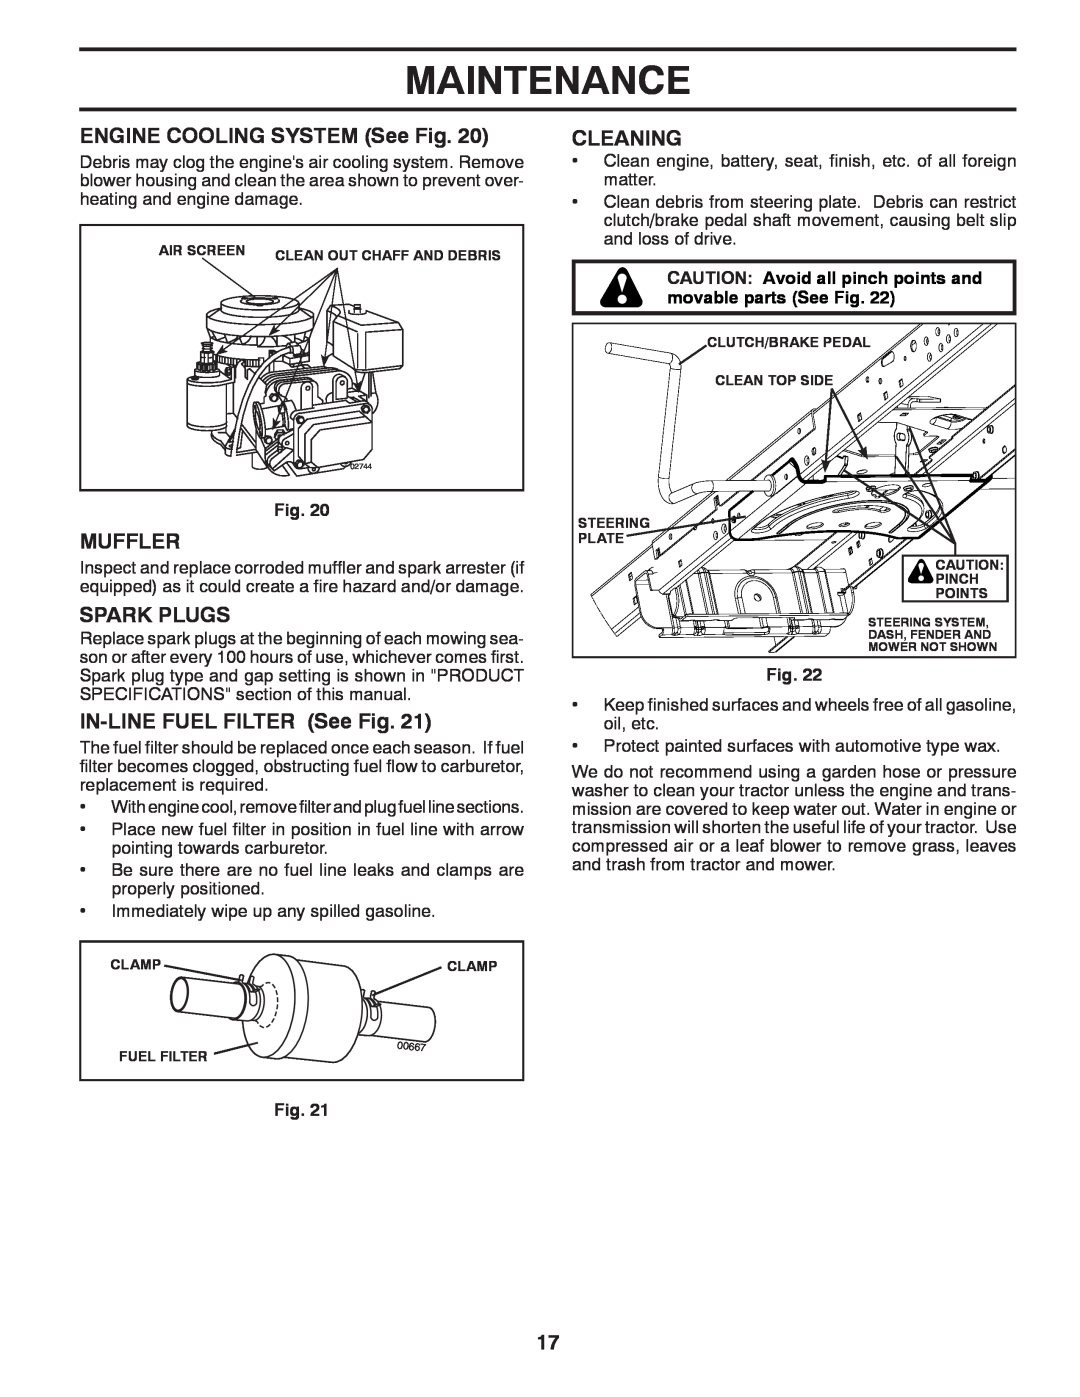 Poulan 96048001800 ENGINE COOLING SYSTEM See Fig, Muffler, Spark Plugs, IN-LINE FUEL FILTER See Fig, Cleaning, Maintenance 